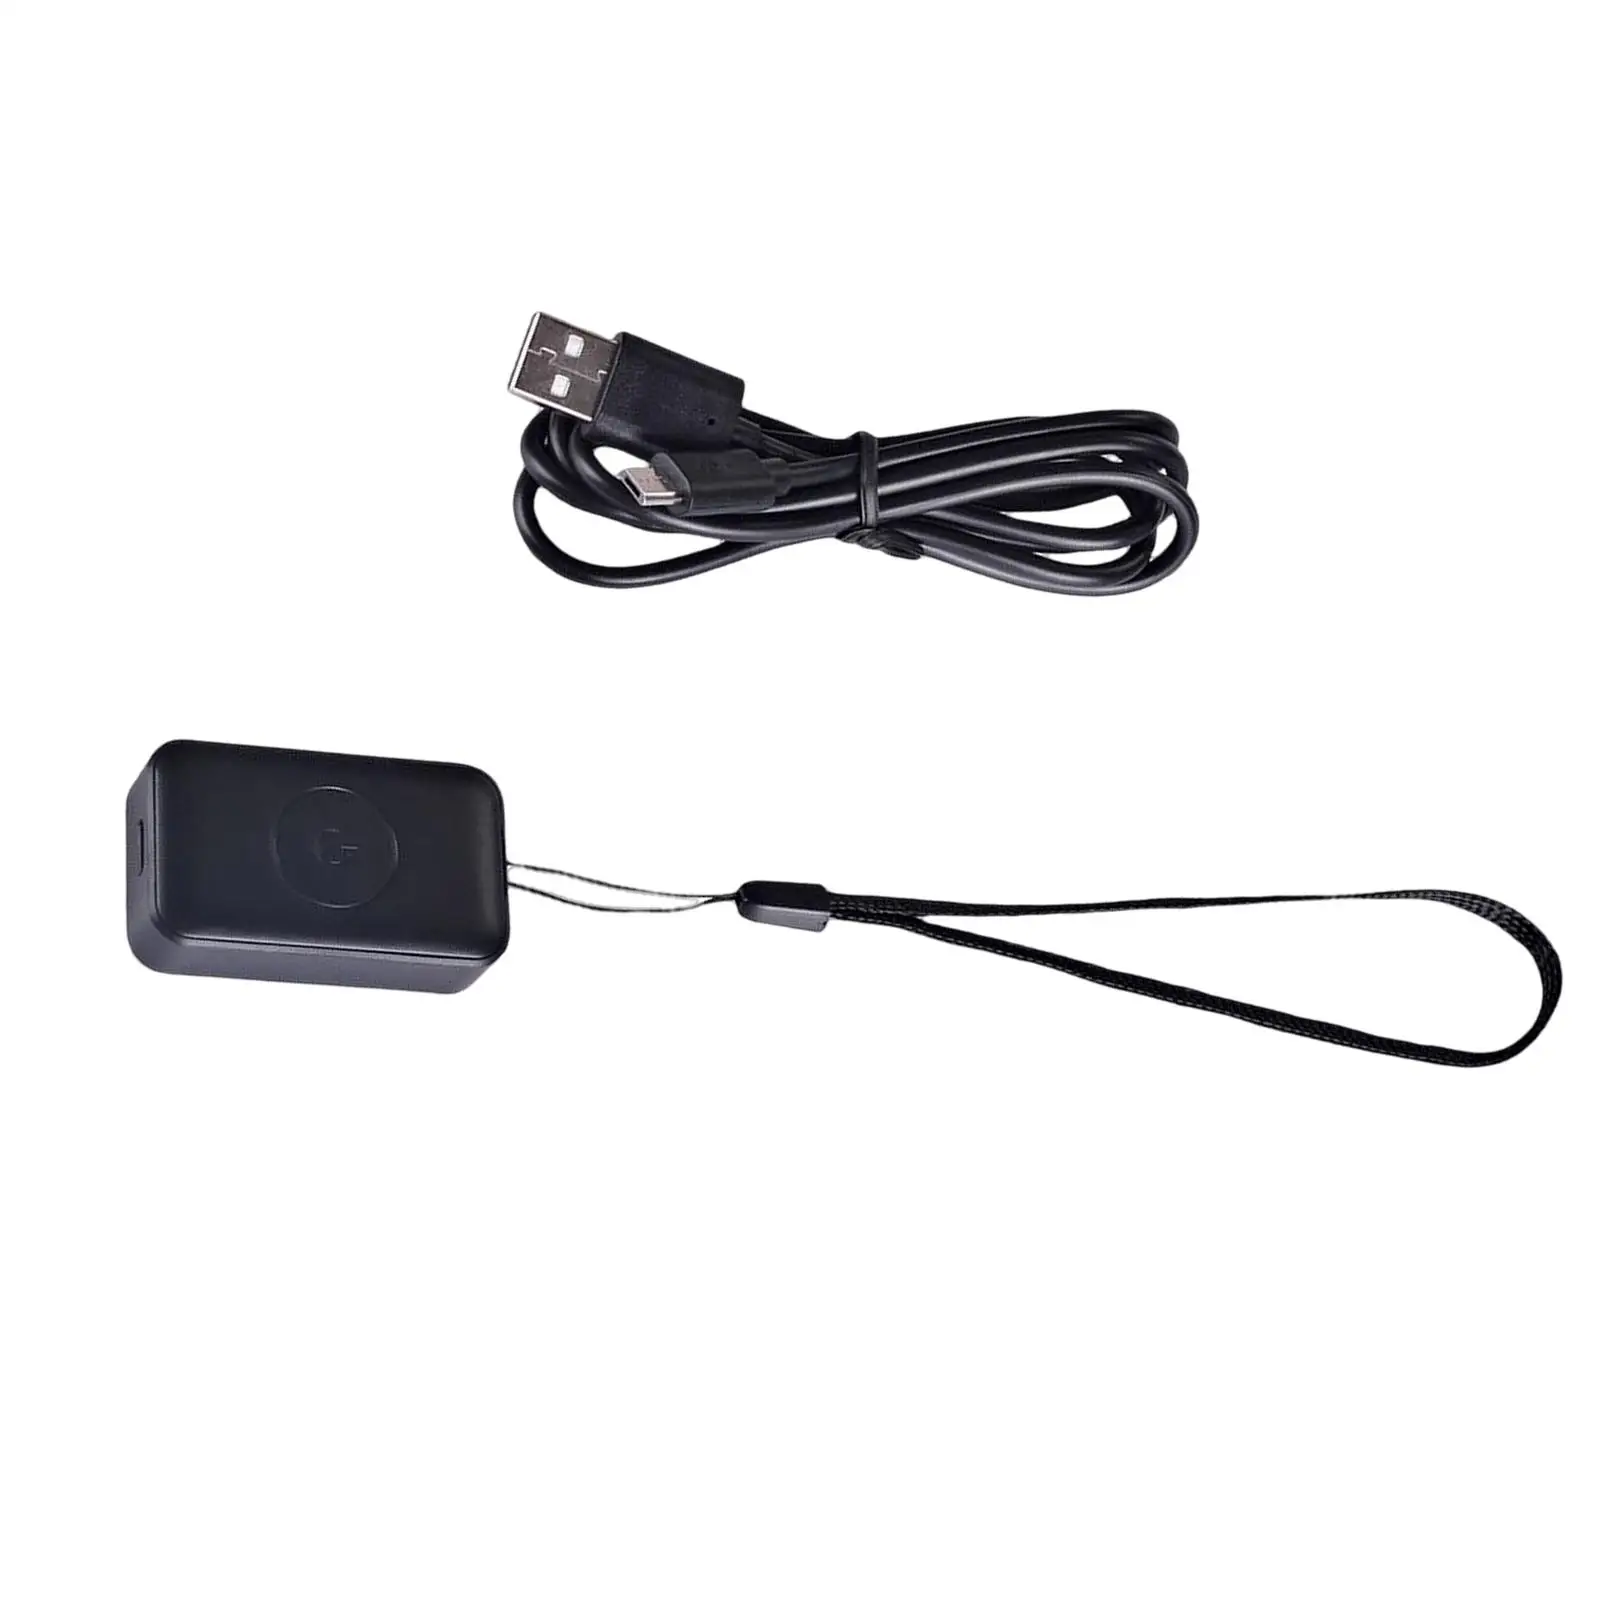       lbs Historical Route  Devices for Mobile Motorcycles Vehicles Trucks